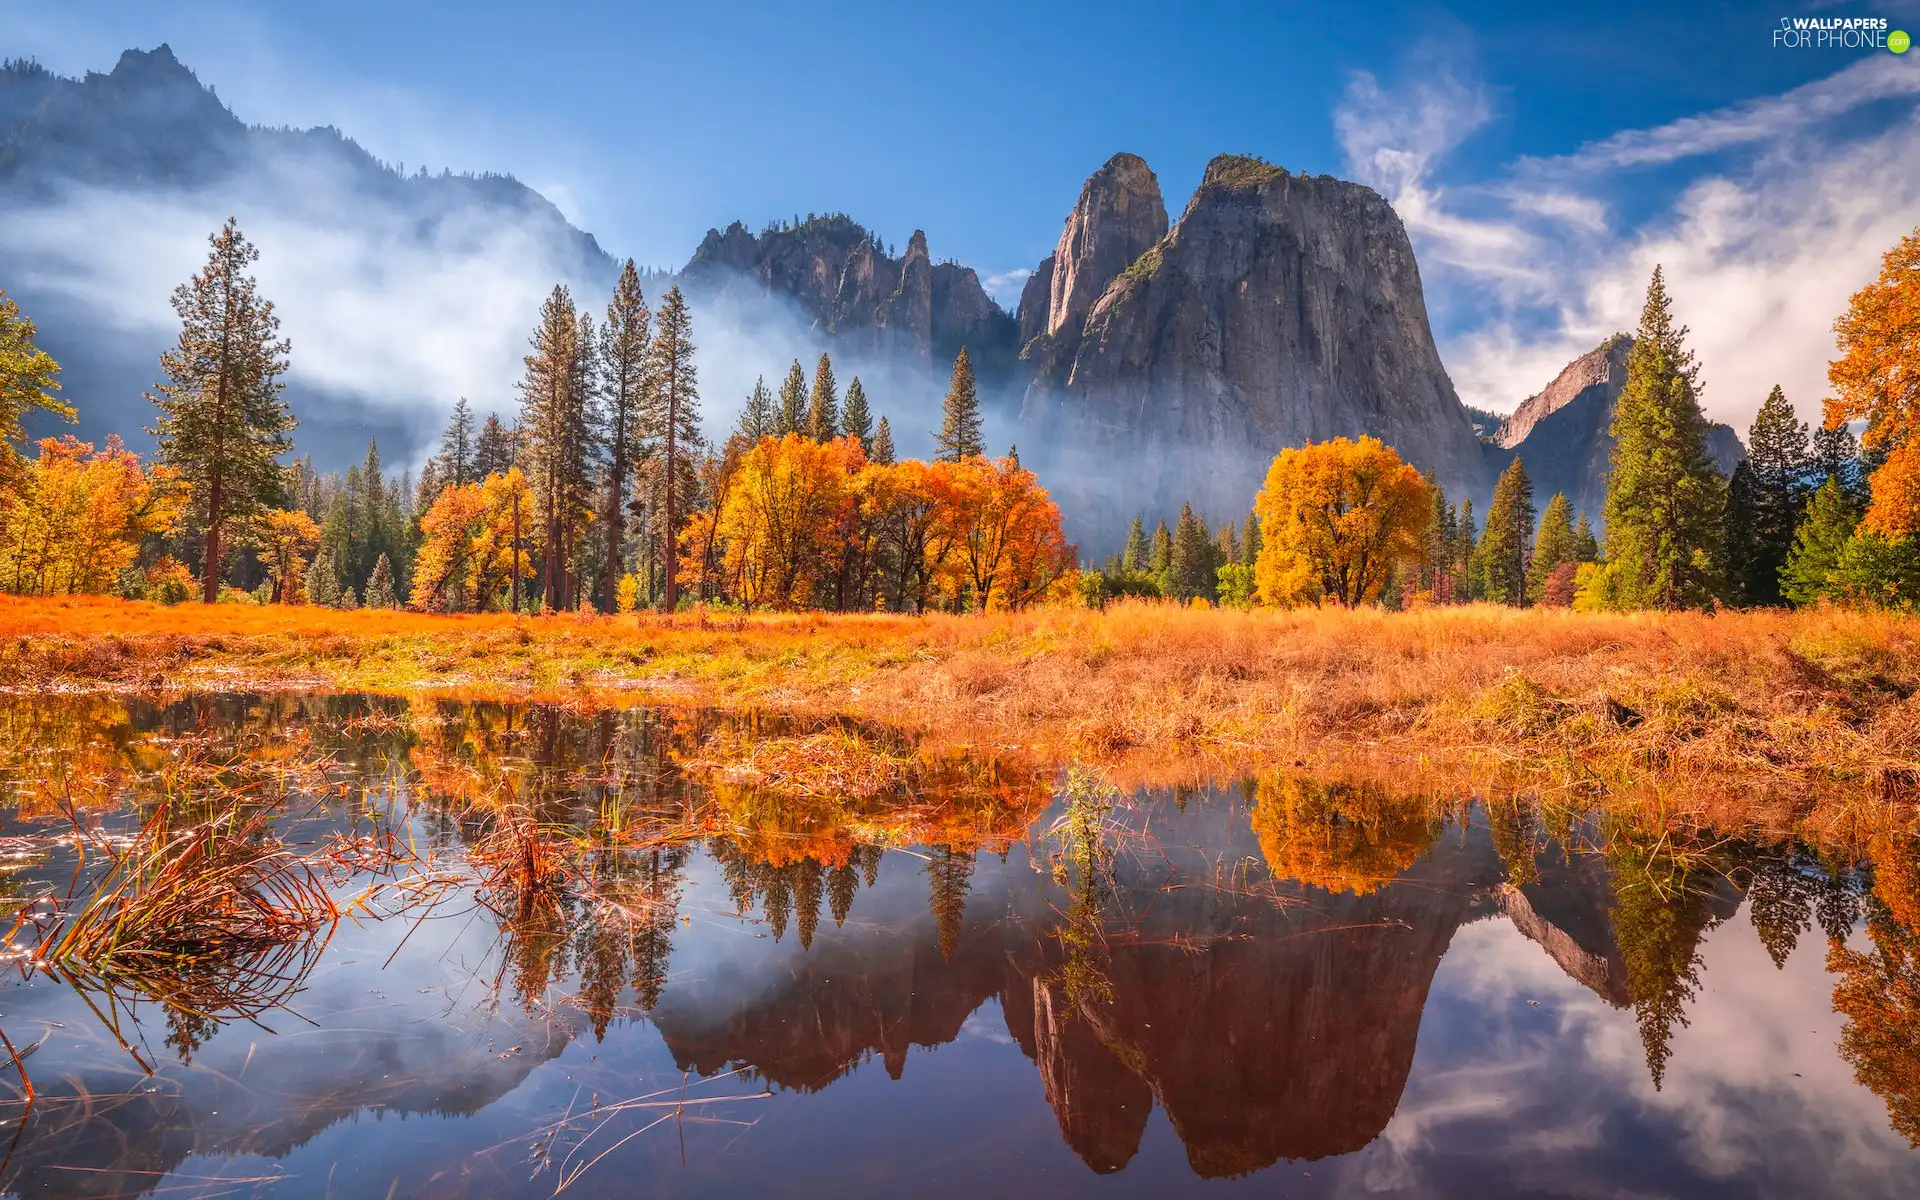 California, The United States, Yosemite National Park, Mountains, River, reflection, trees, viewes, autumn